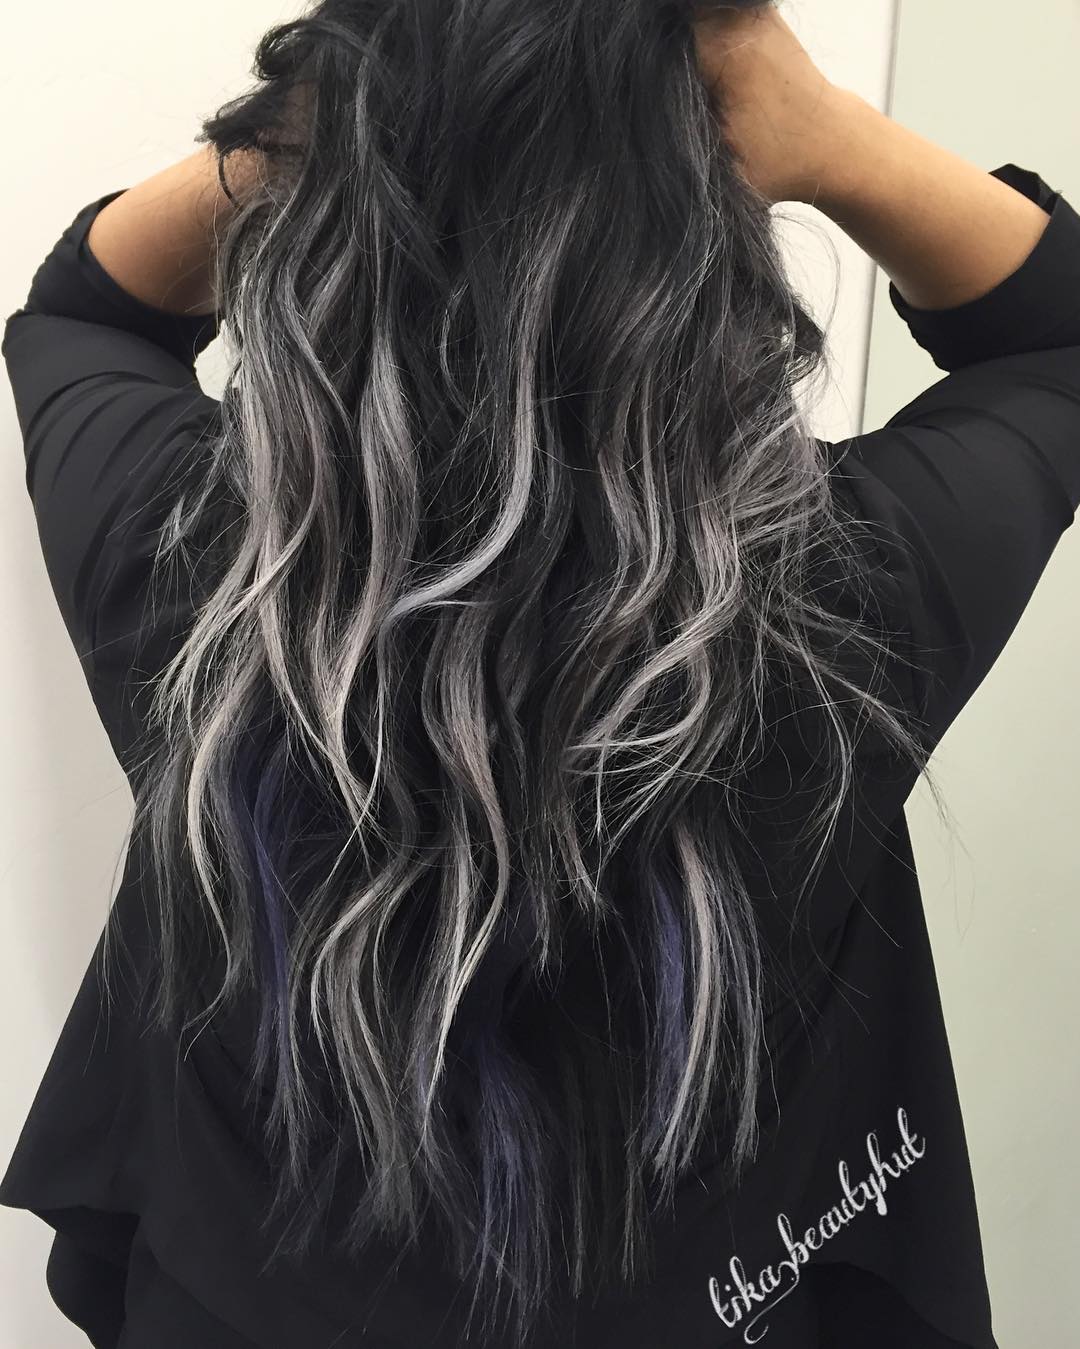 Black Hair With Subtle Gray Highlights